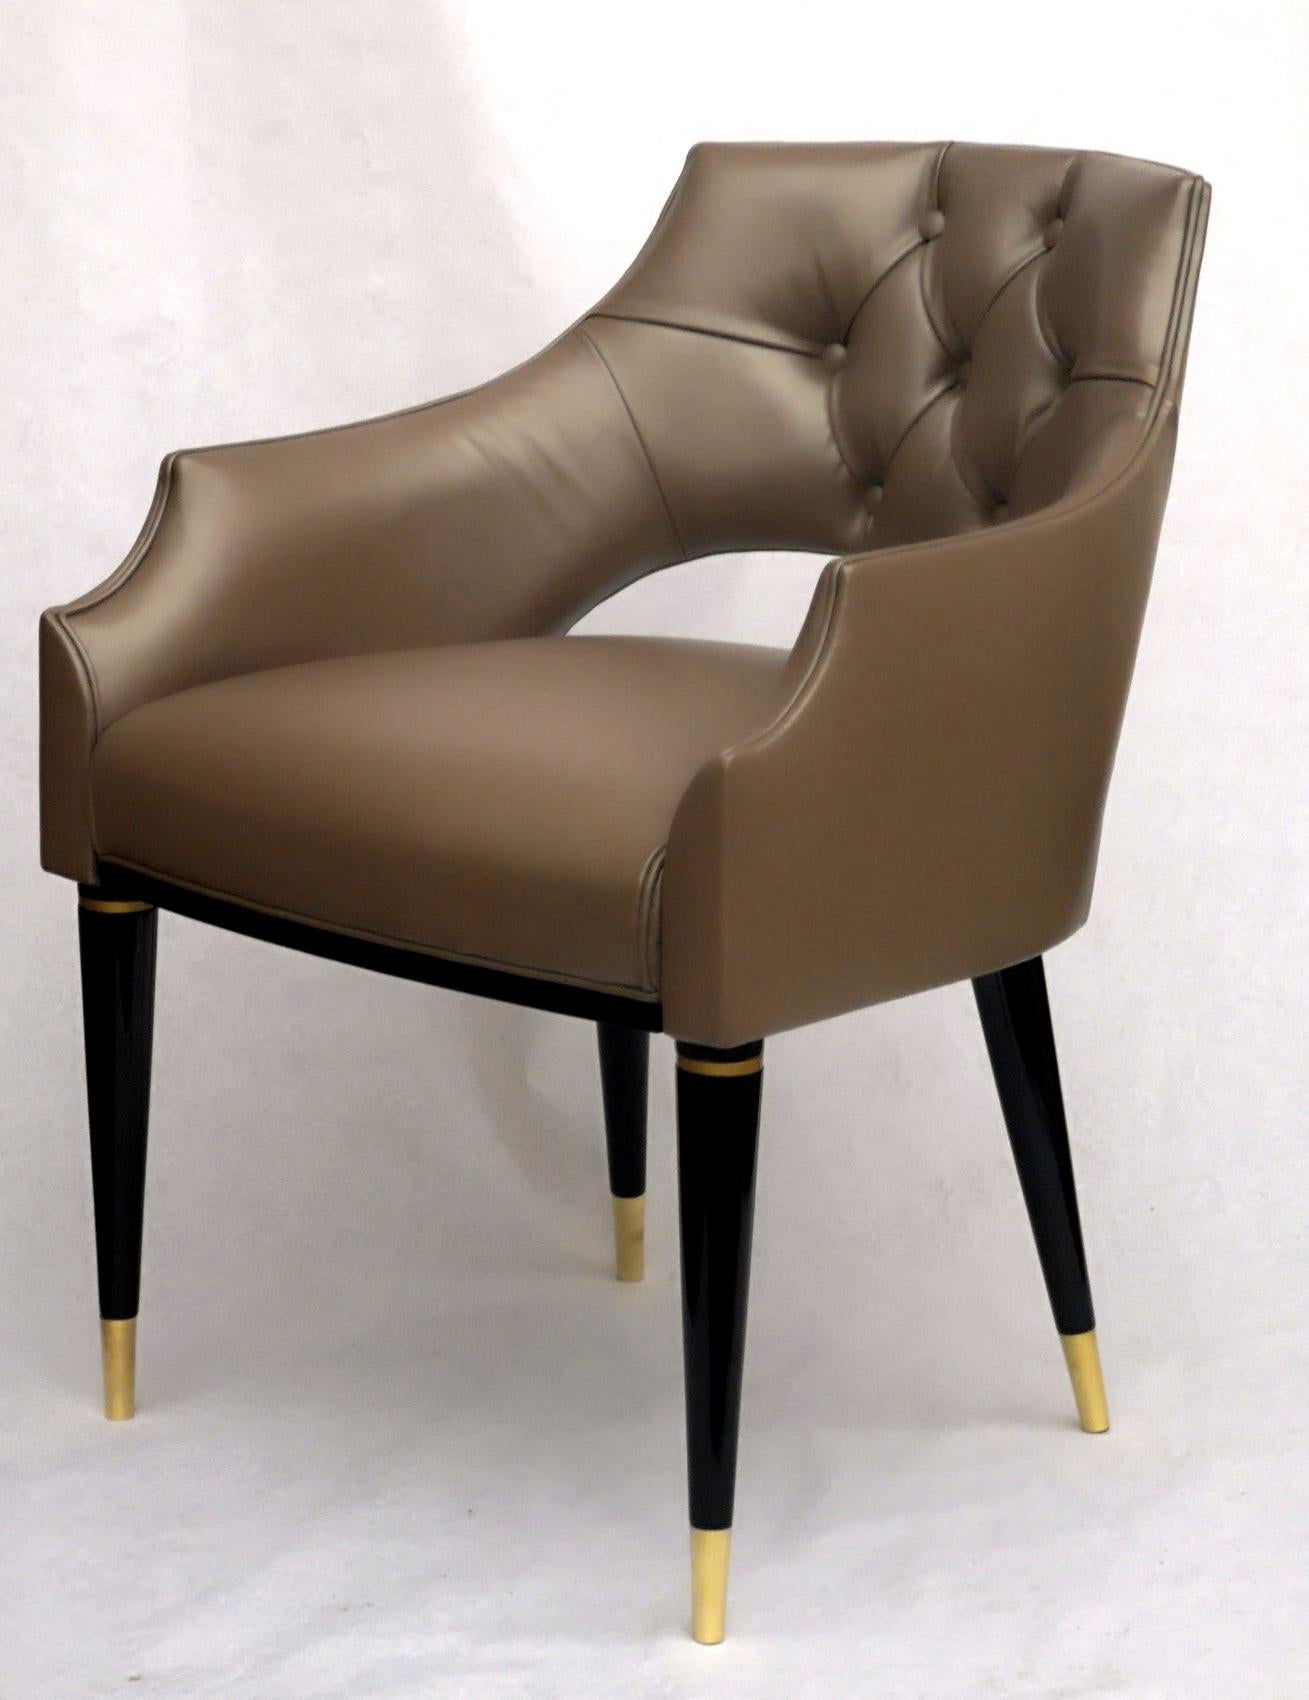 Dining Armchair, Tufted Fiore Italian Leather, Midcentury Style, Luxury Details 10